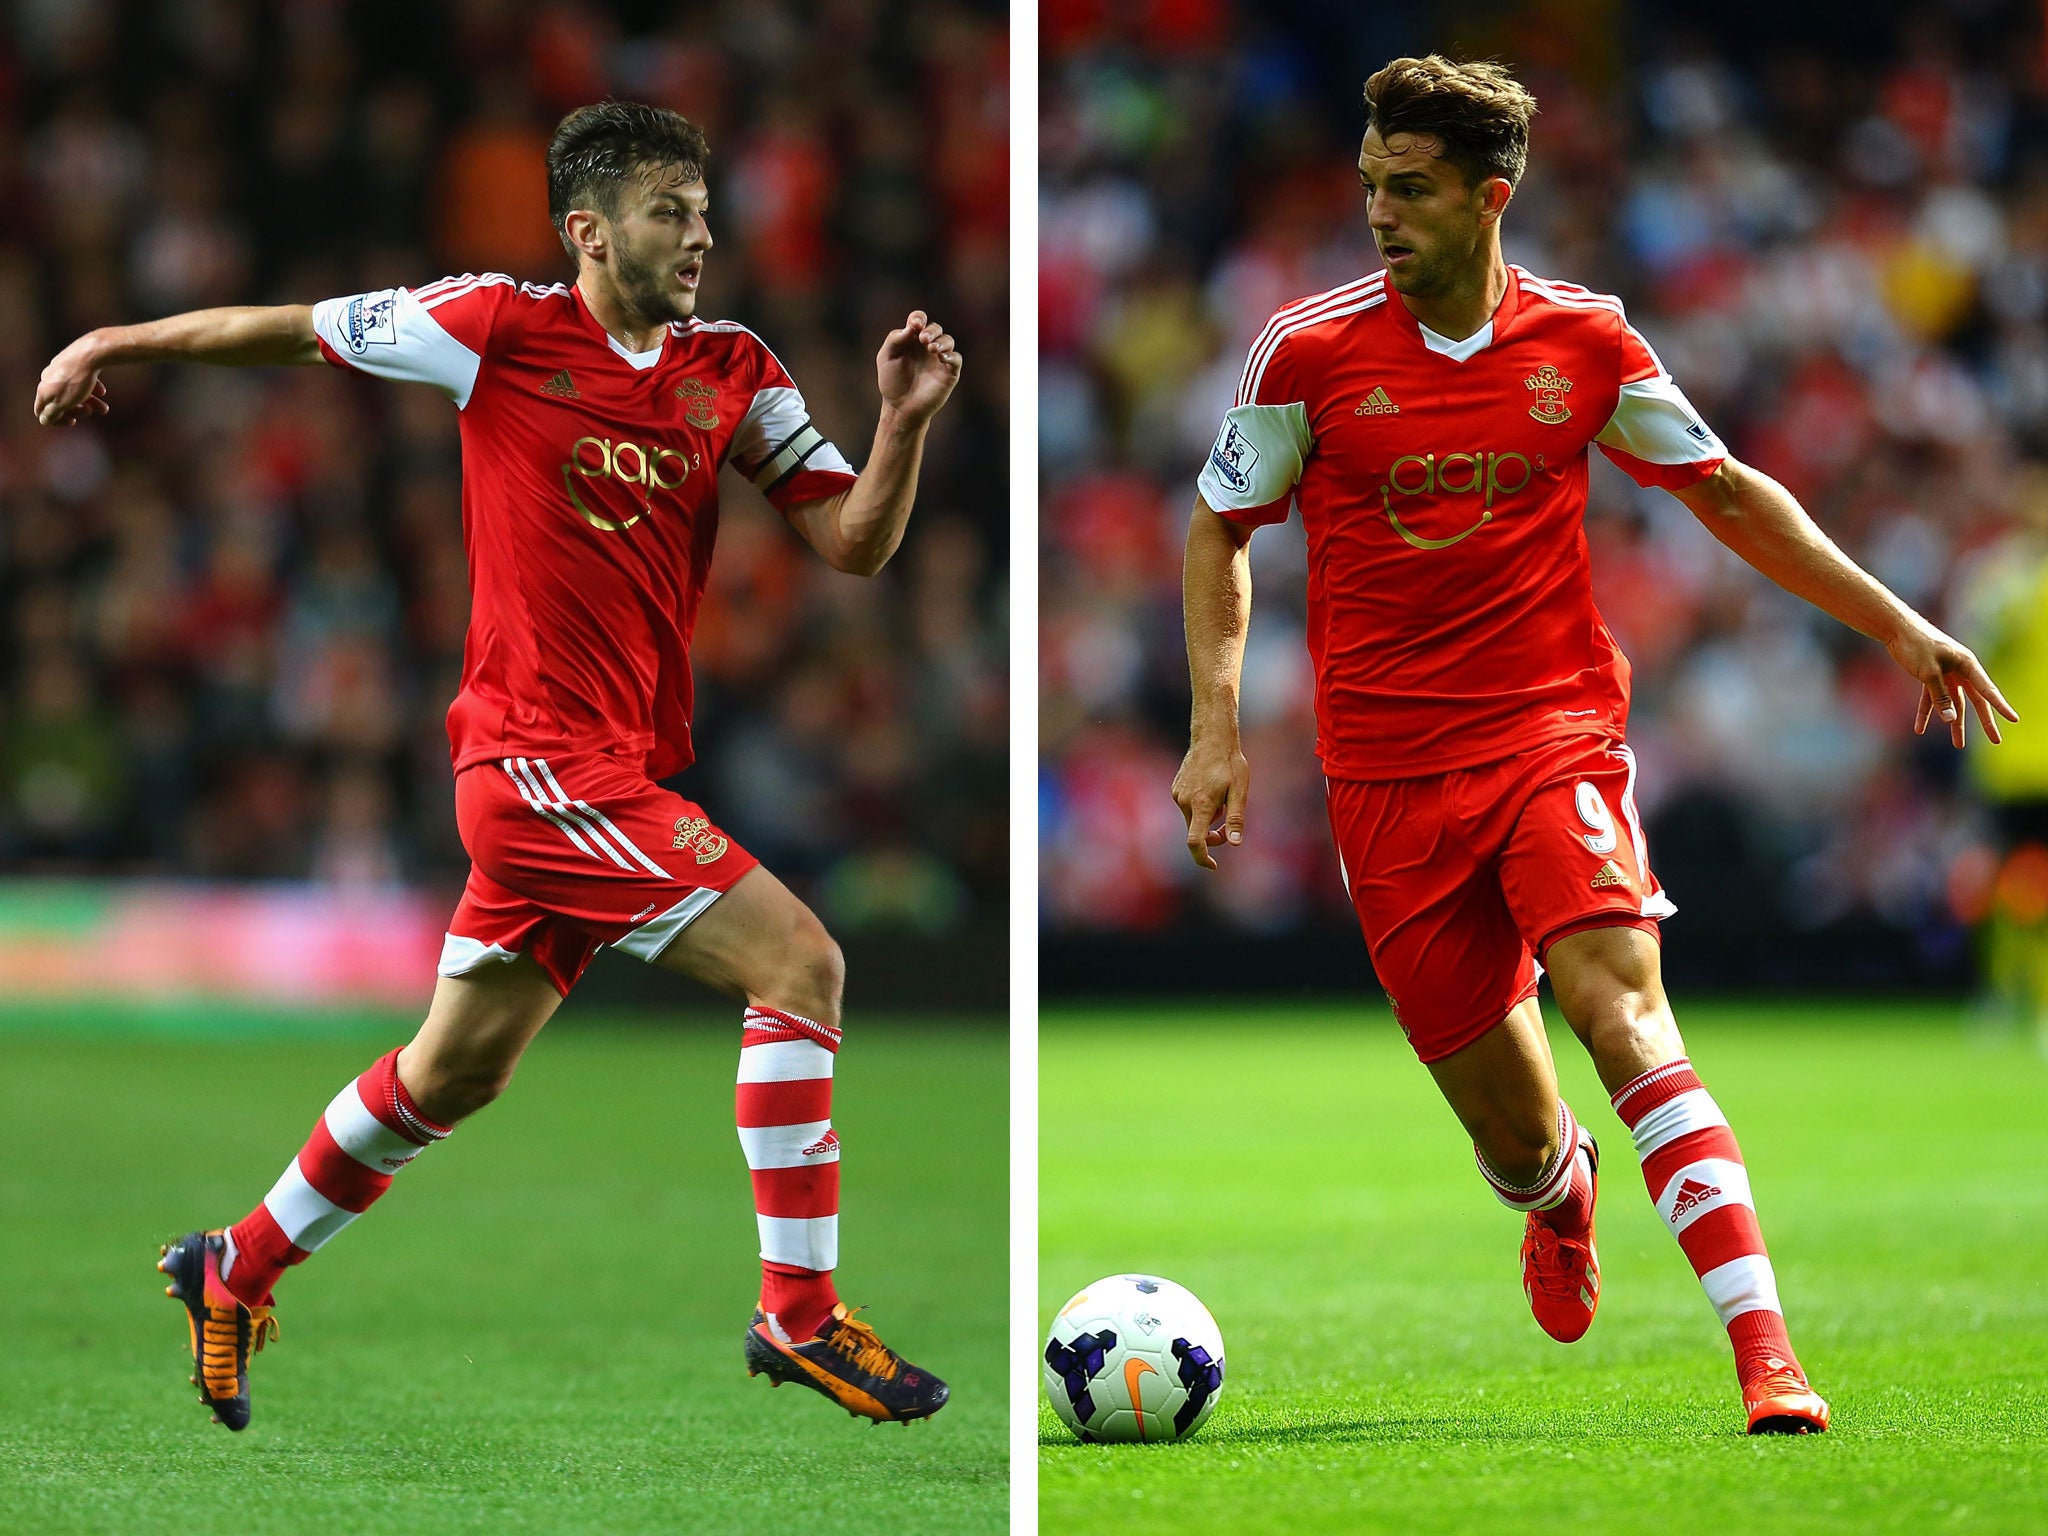 Southampton duo Adam Lallana and Jay Rodriguez have received a call-up to the England squad for the friendlies against Chile and Germany